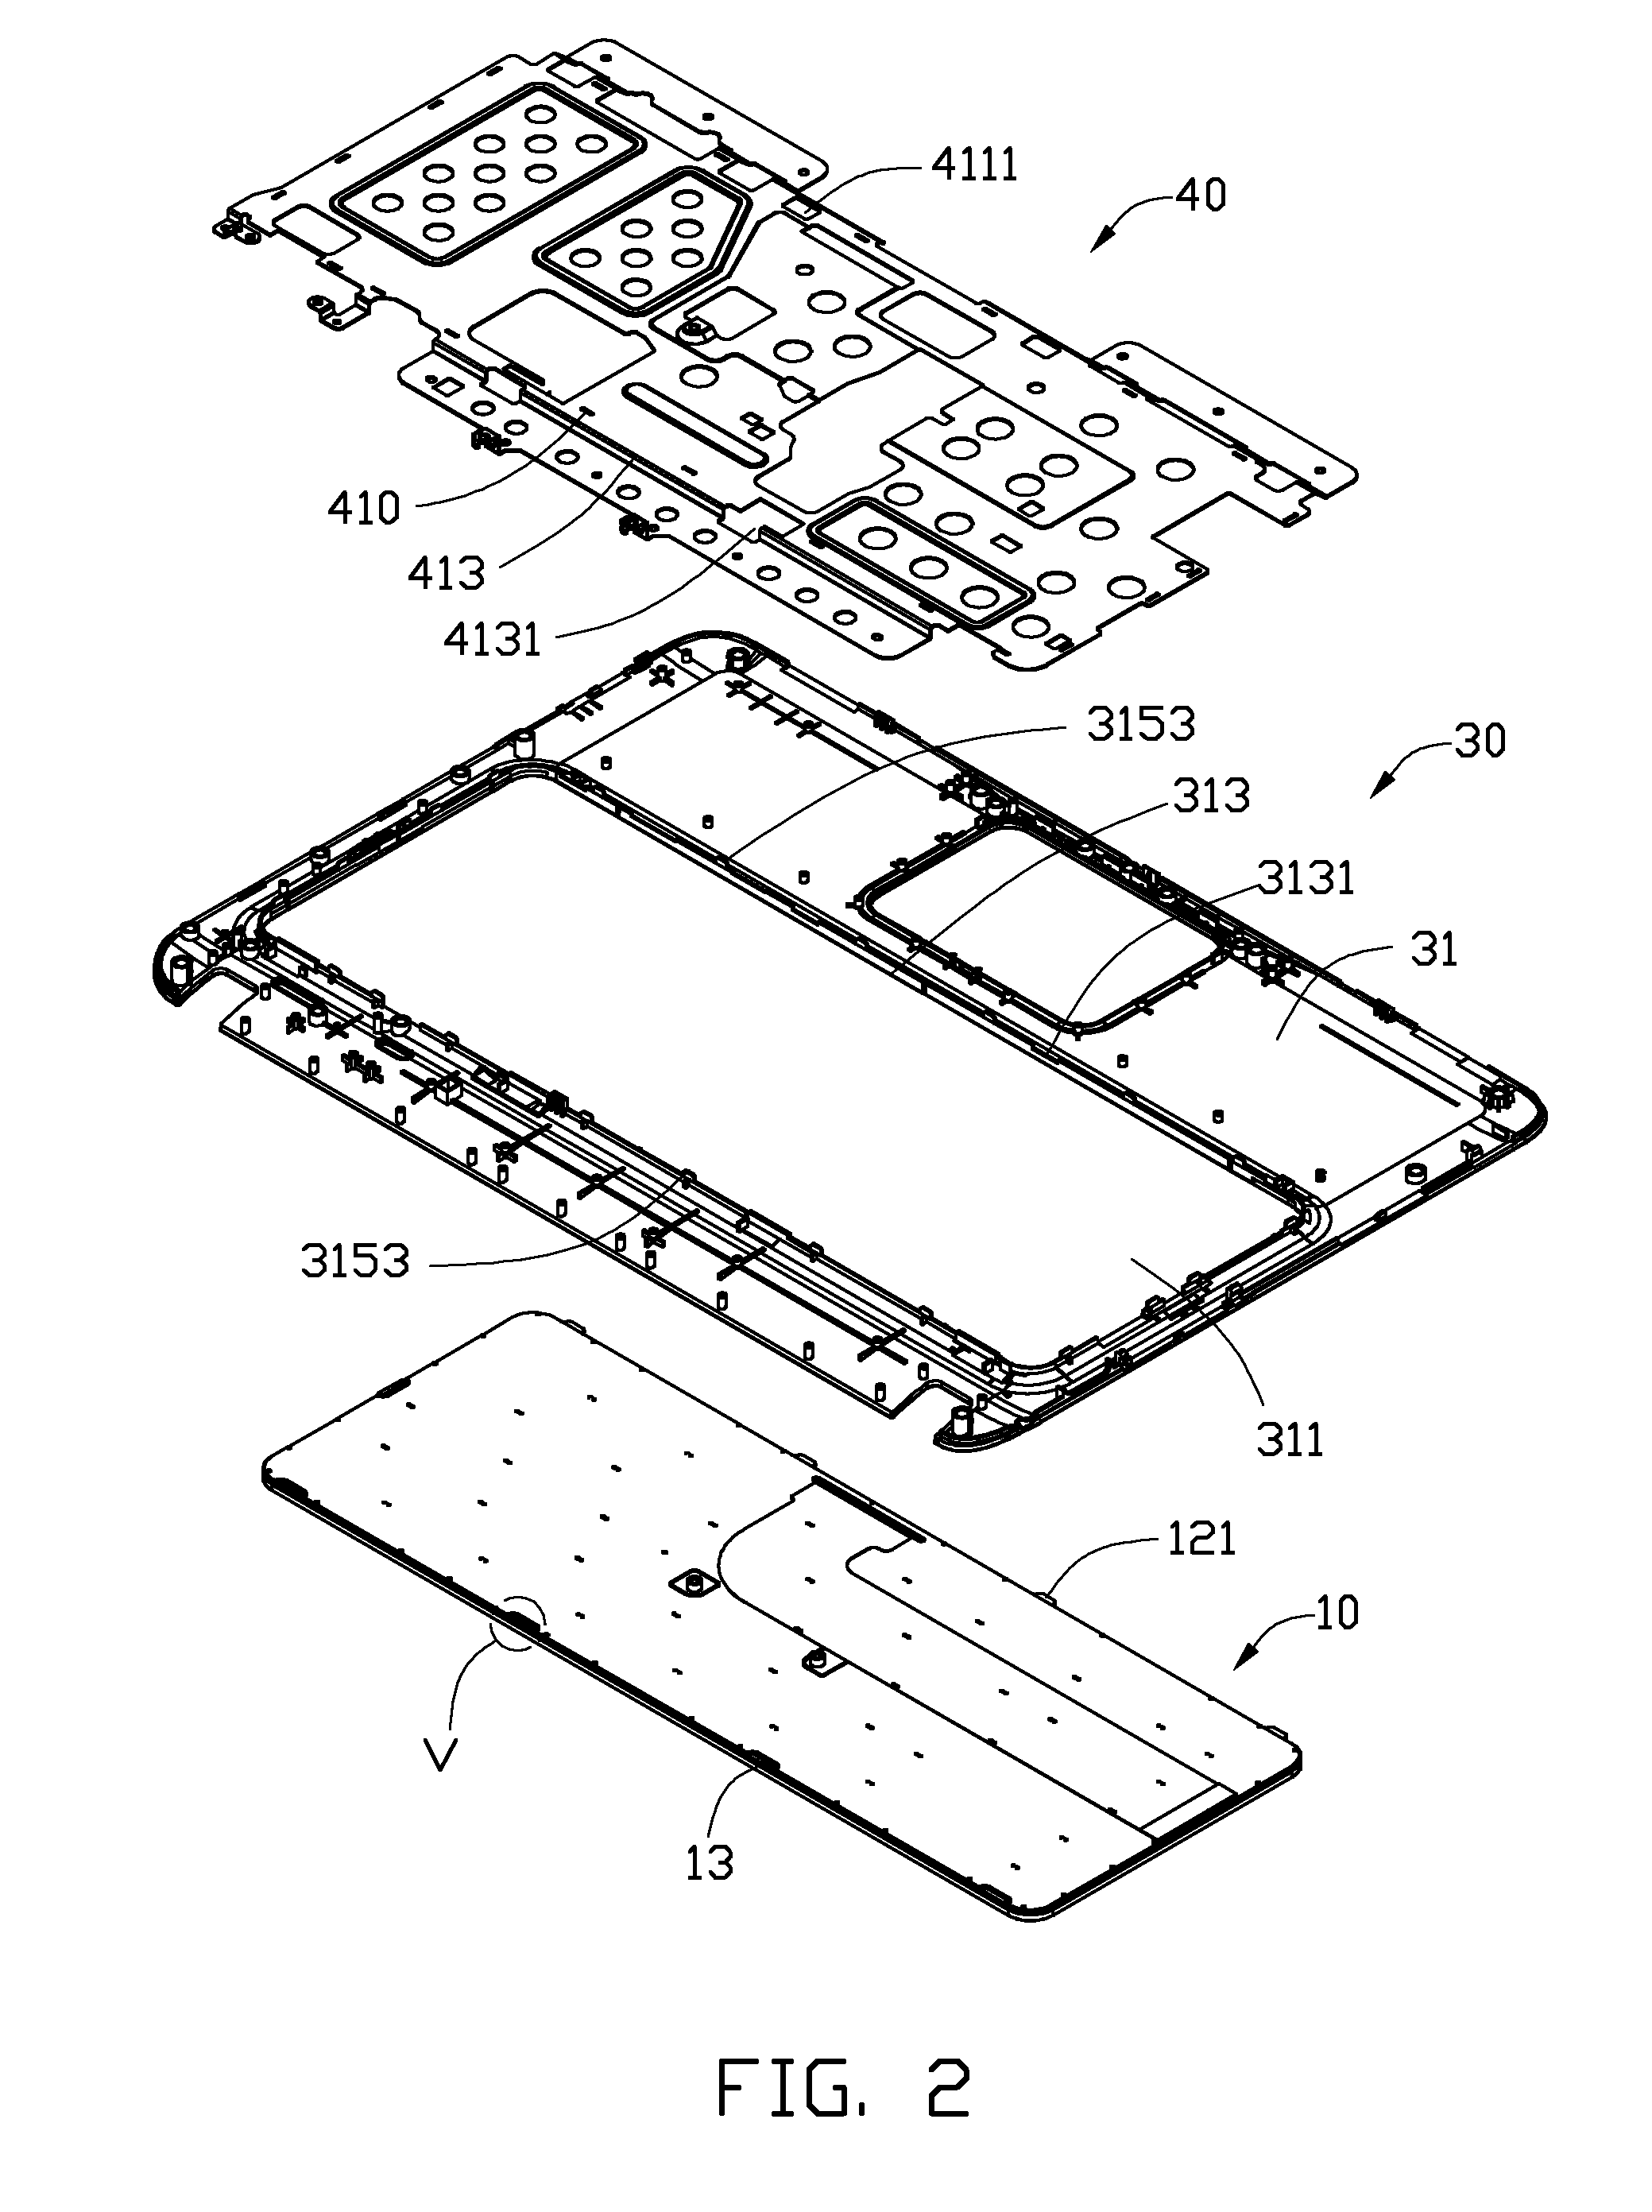 Mounting apparatus for computer keyboard